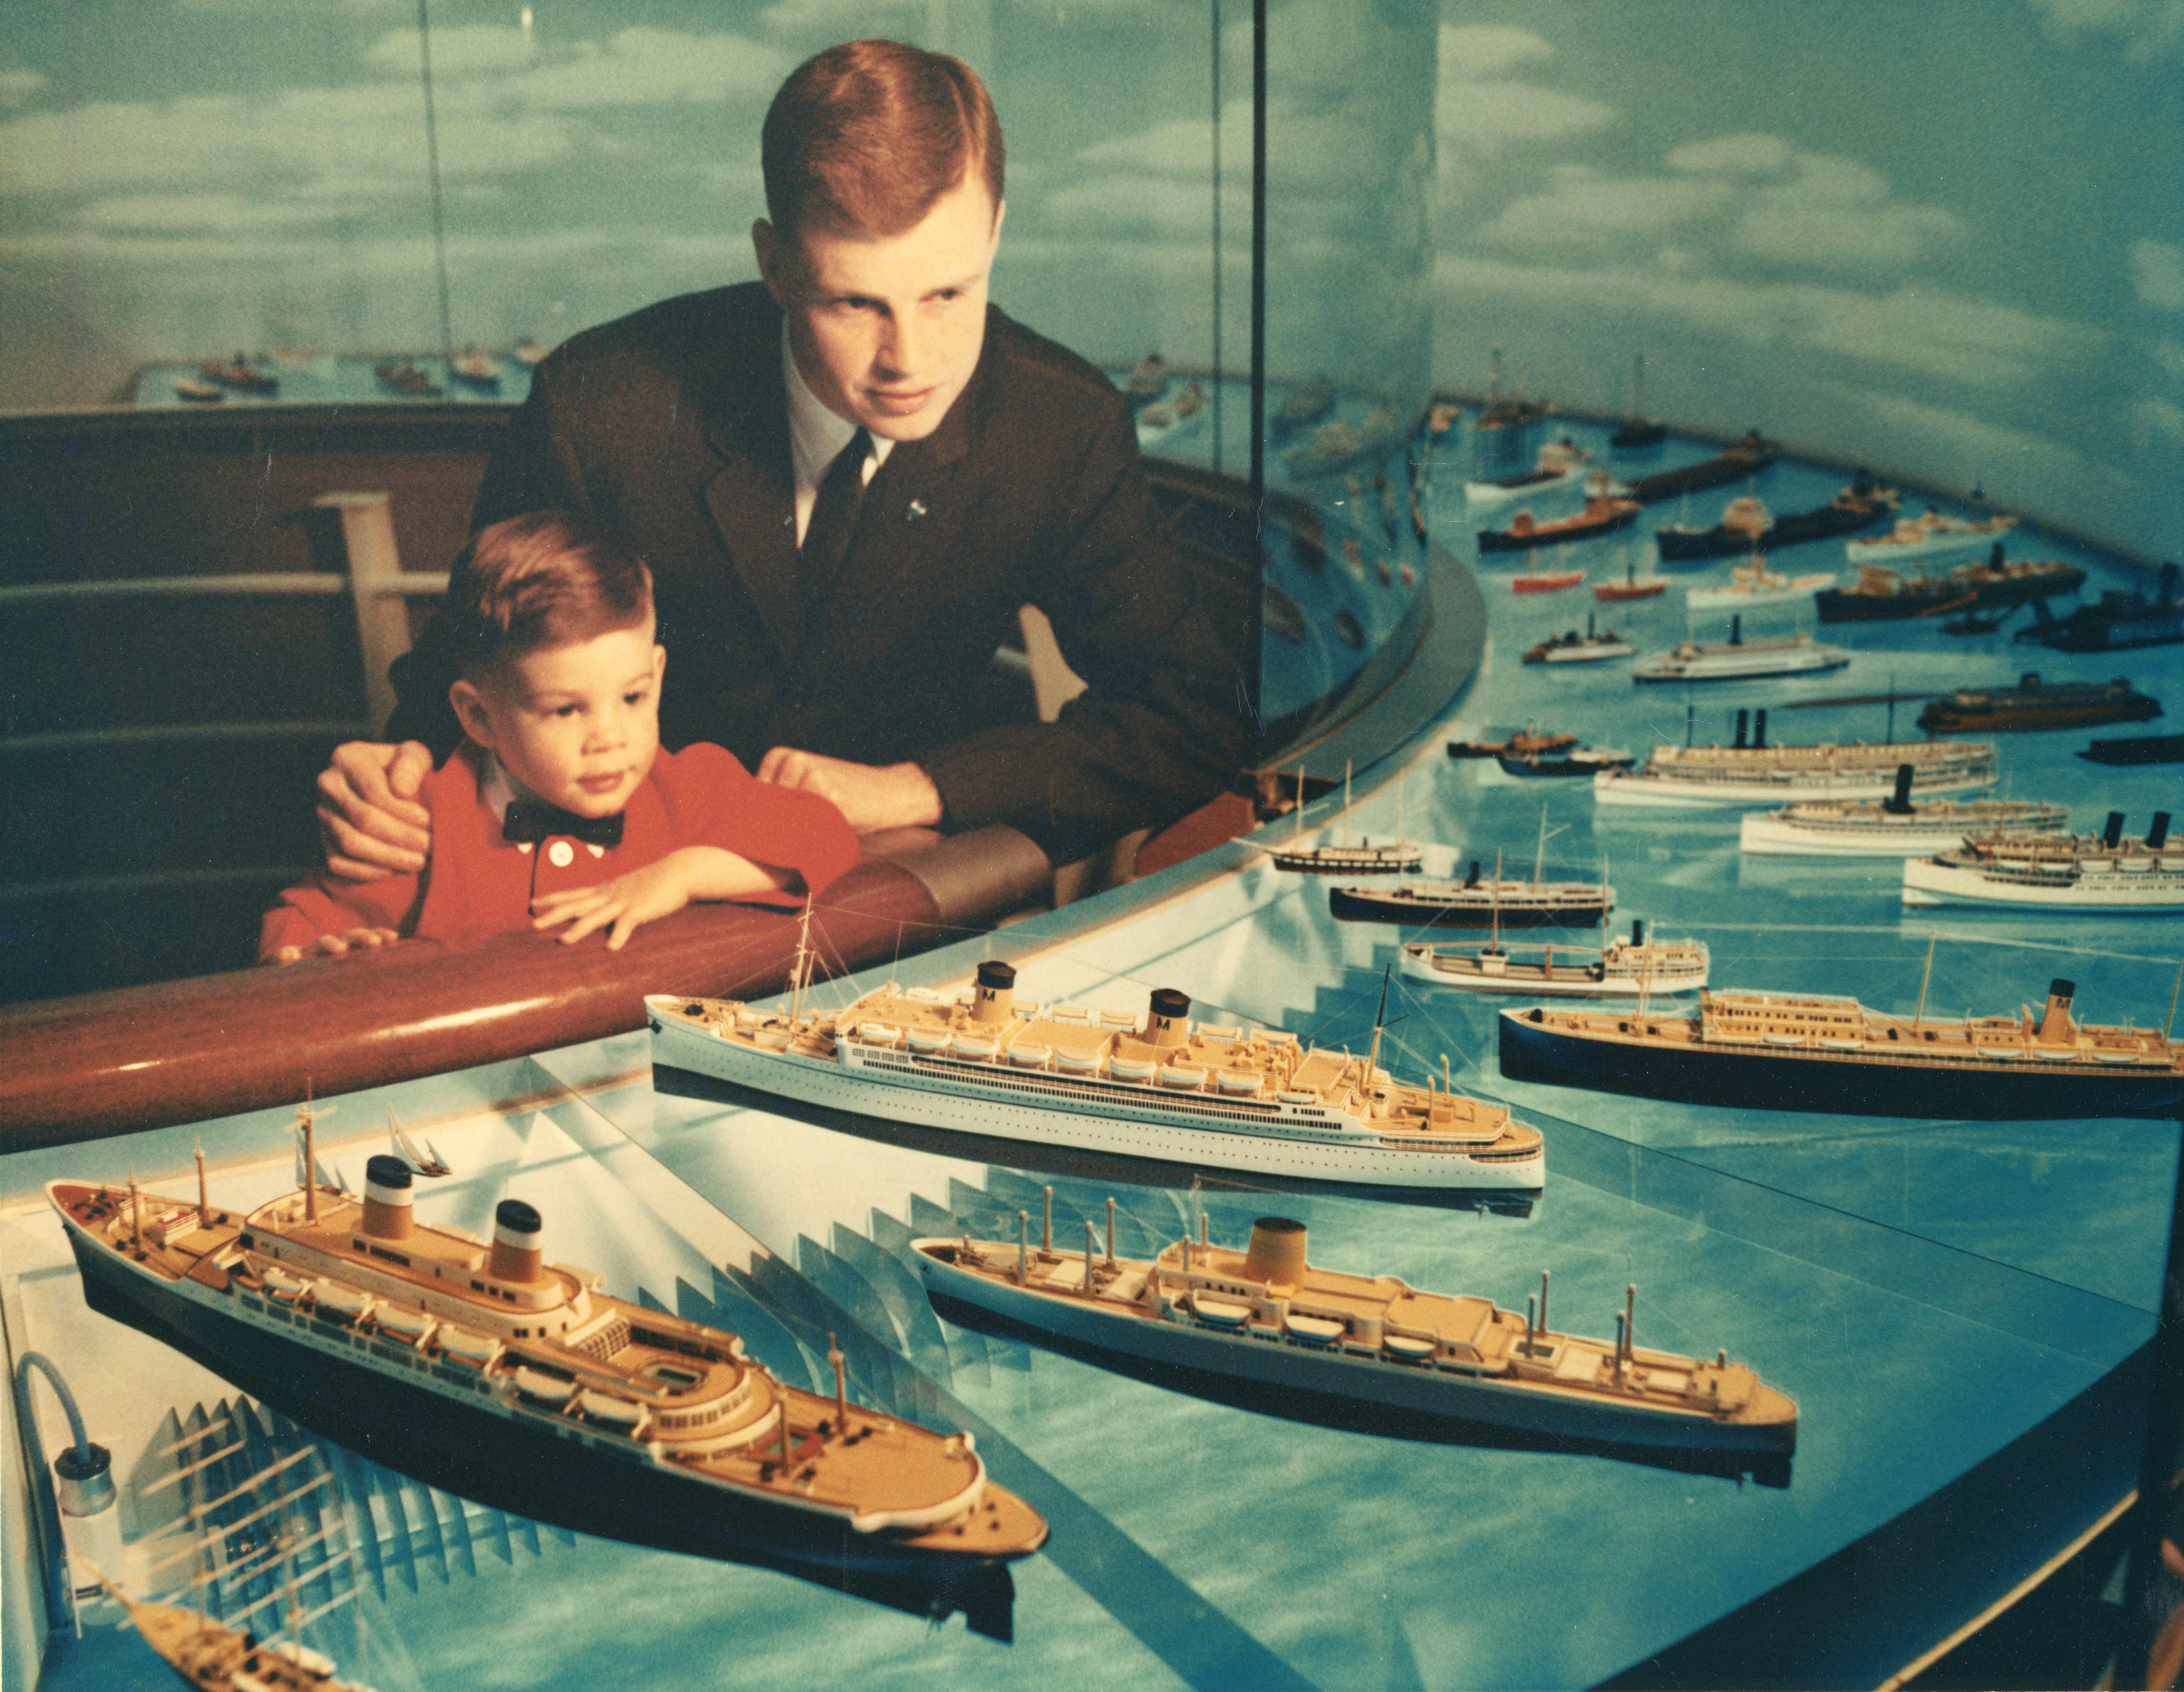 Color photograph of a man and child looking at an exhibit of model ships.